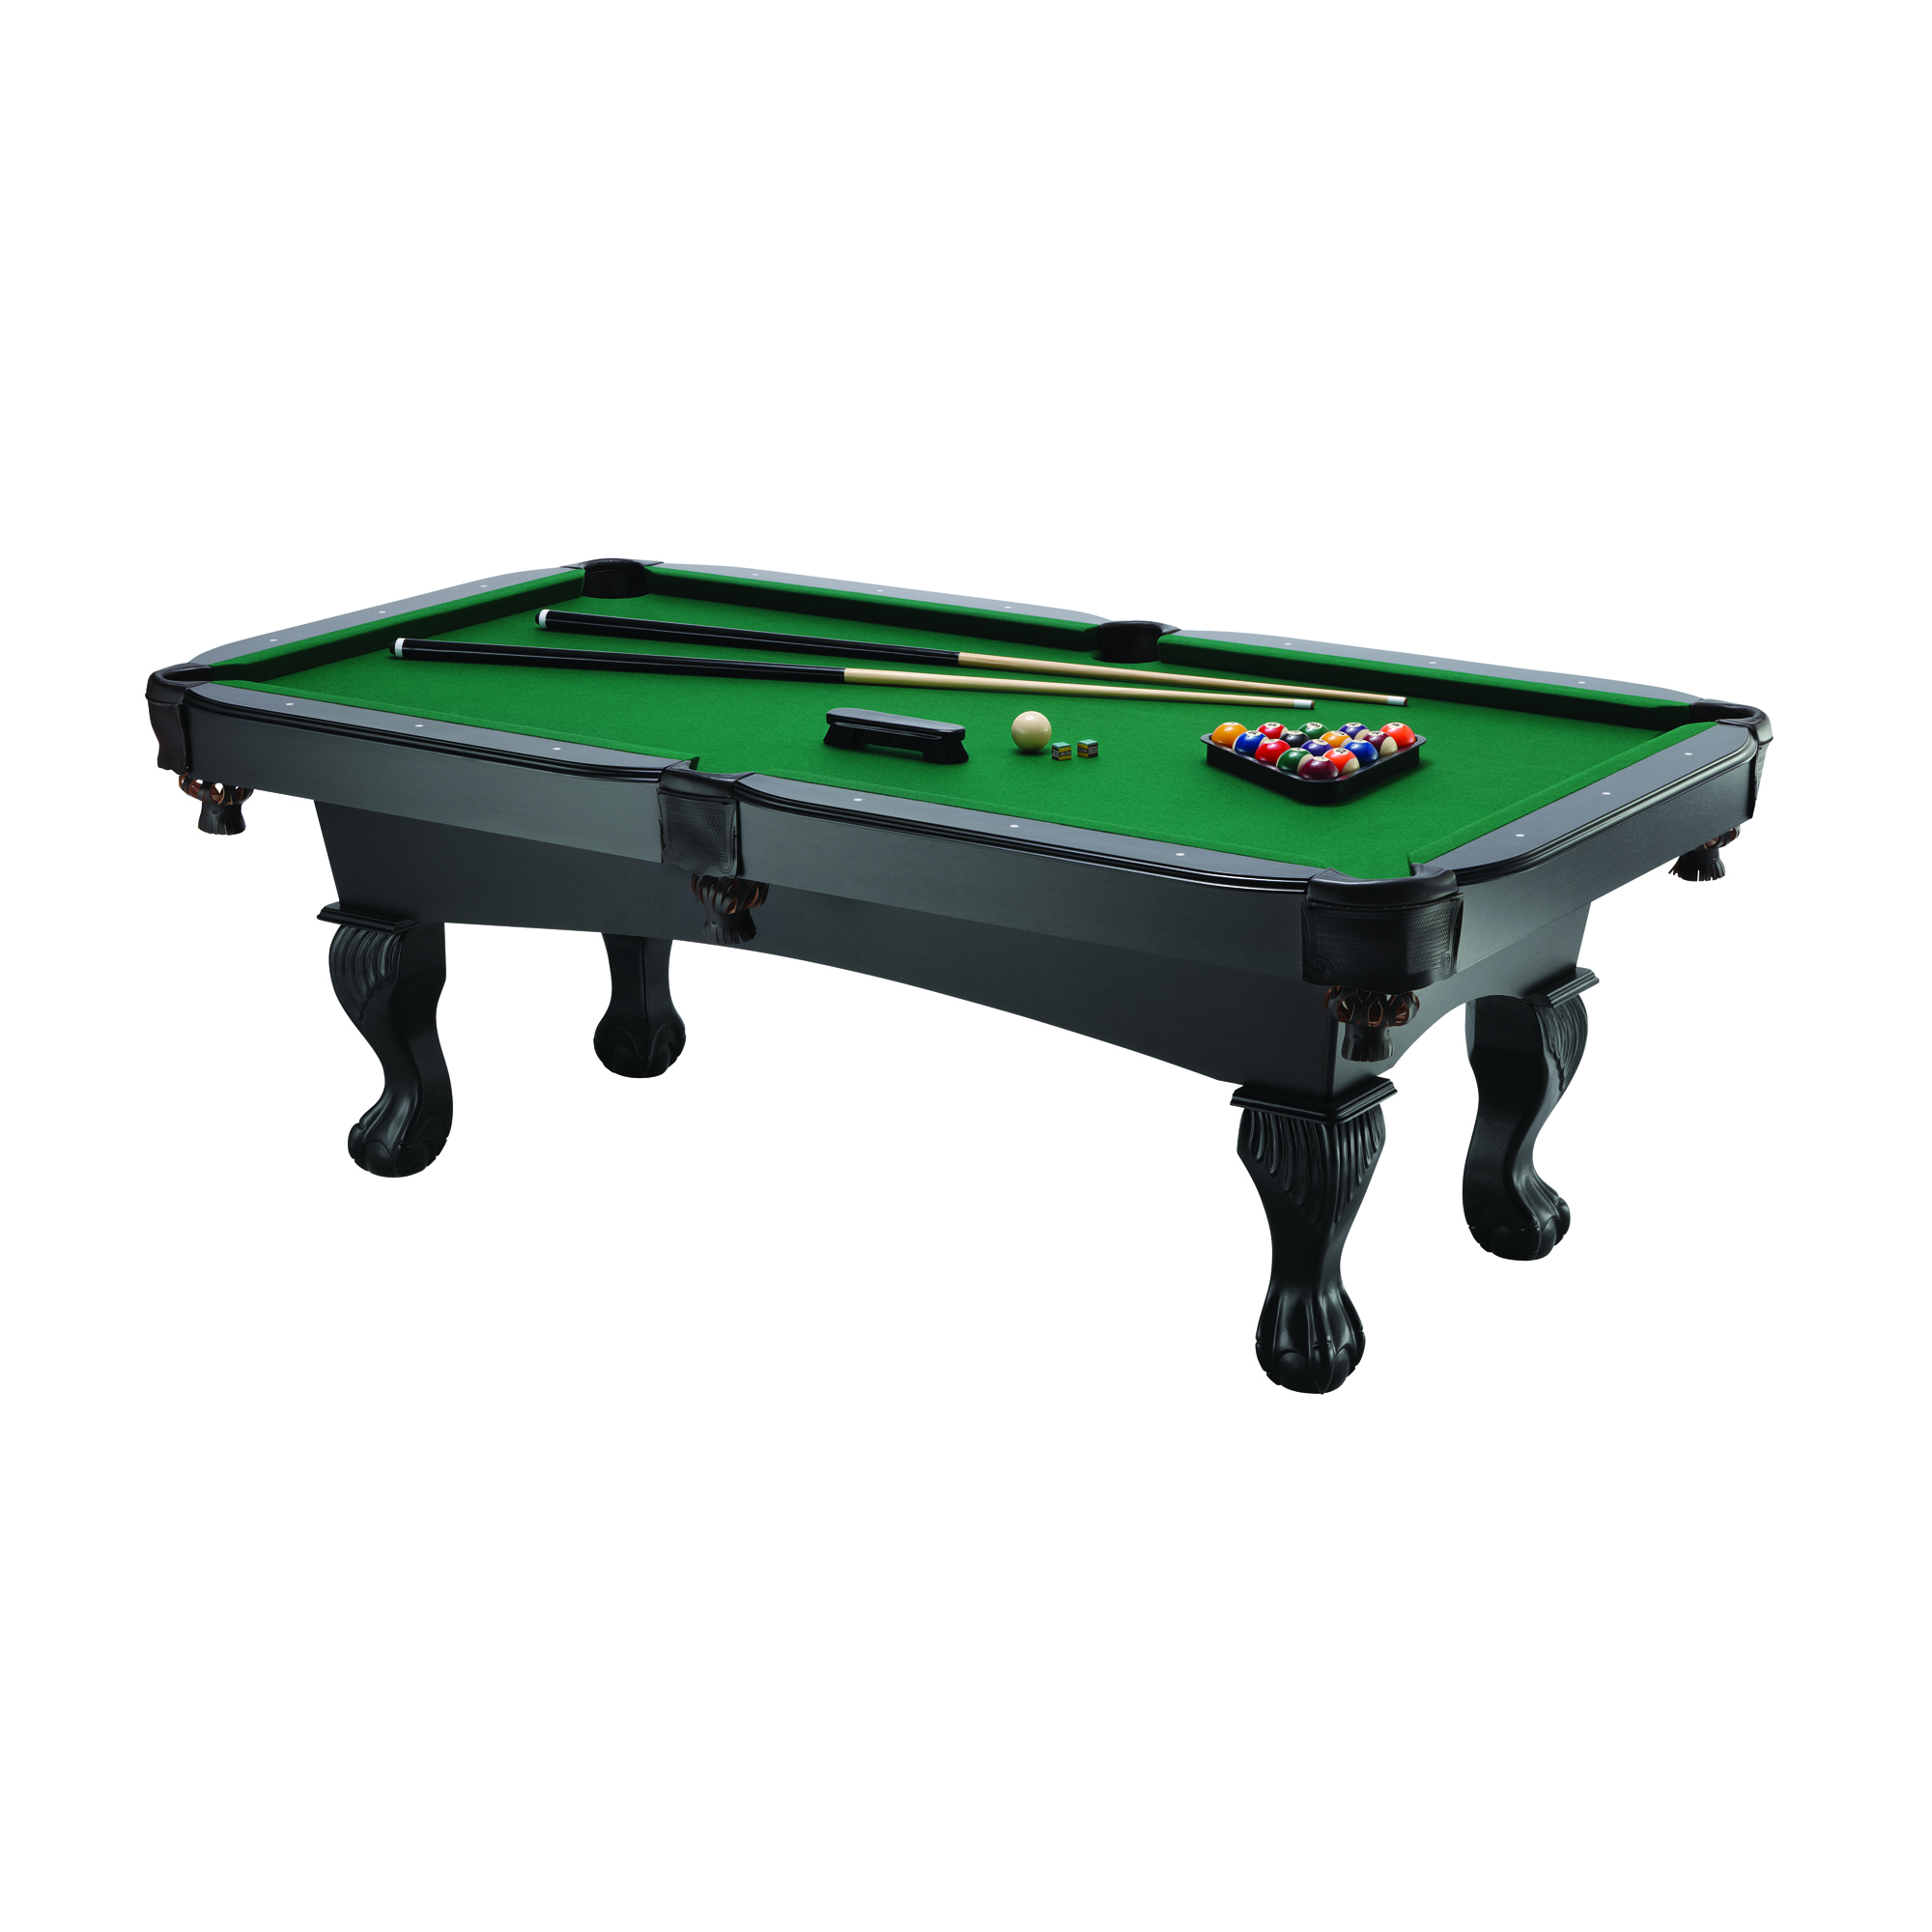 7 Foot Kansas Billiards Table with Ball and Claw Legs